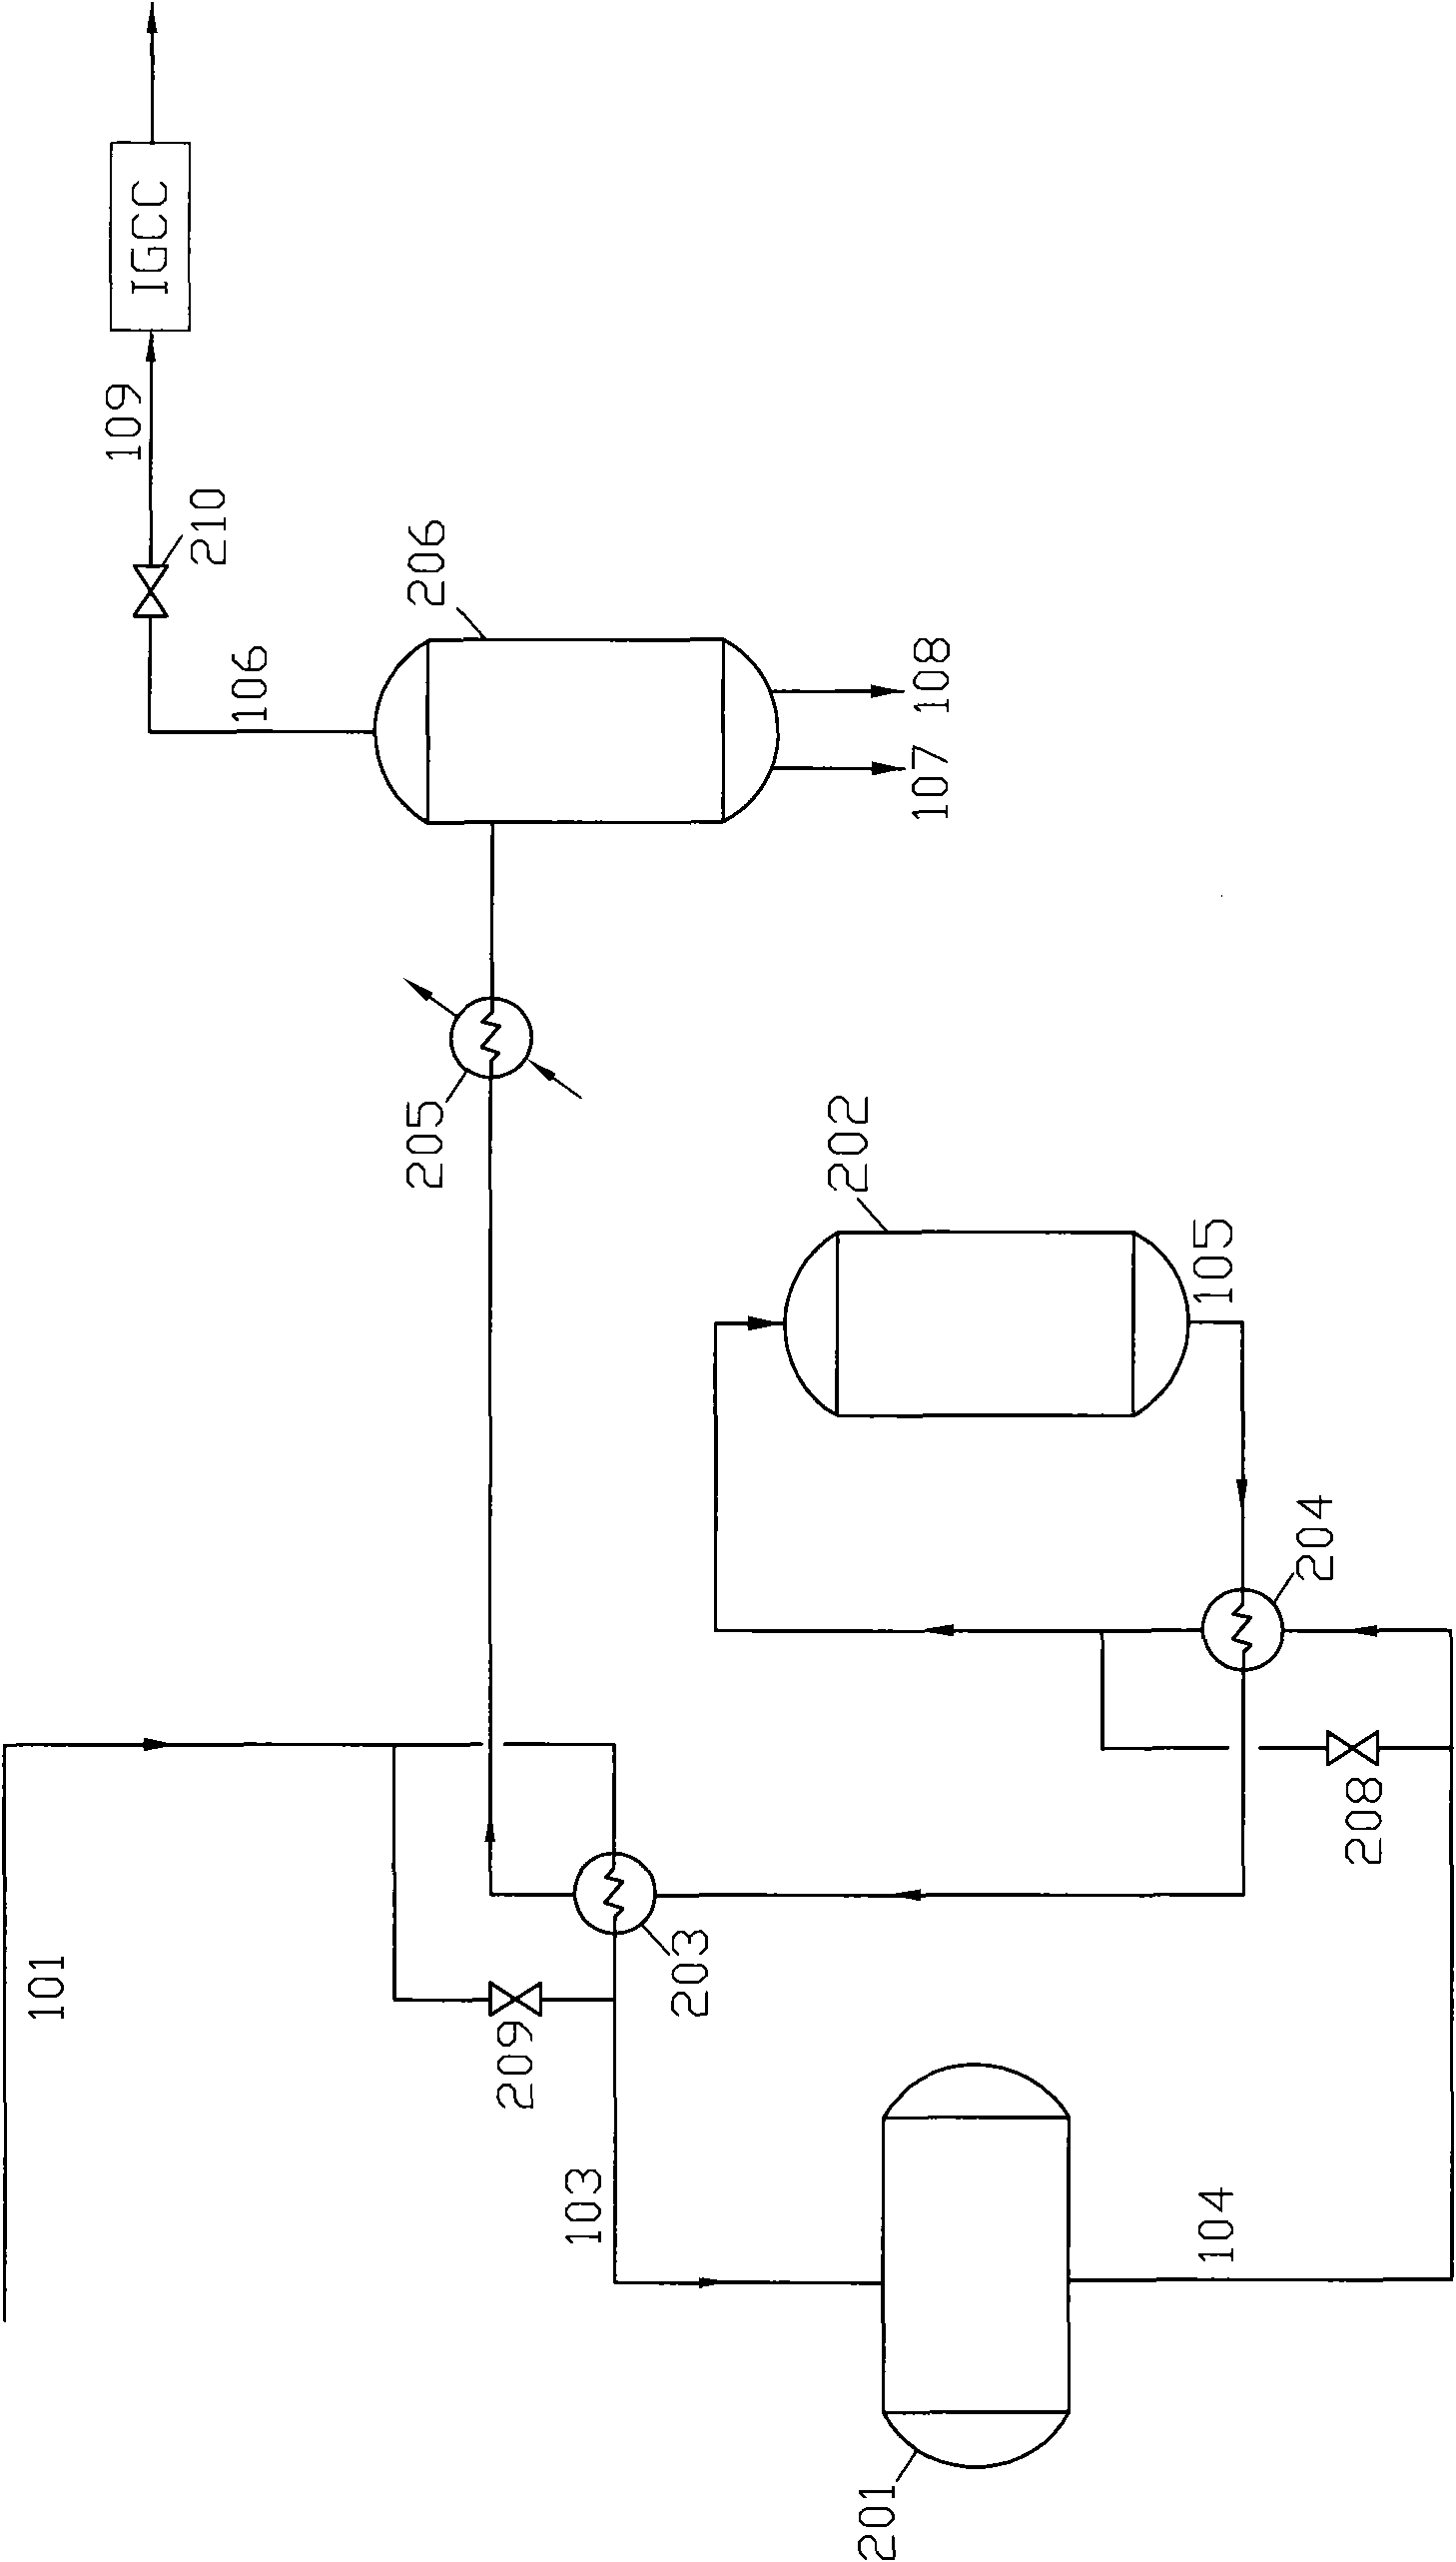 Method and device for producing hydrocarbon by Fishcer-Tropsch reaction of synthesis gas